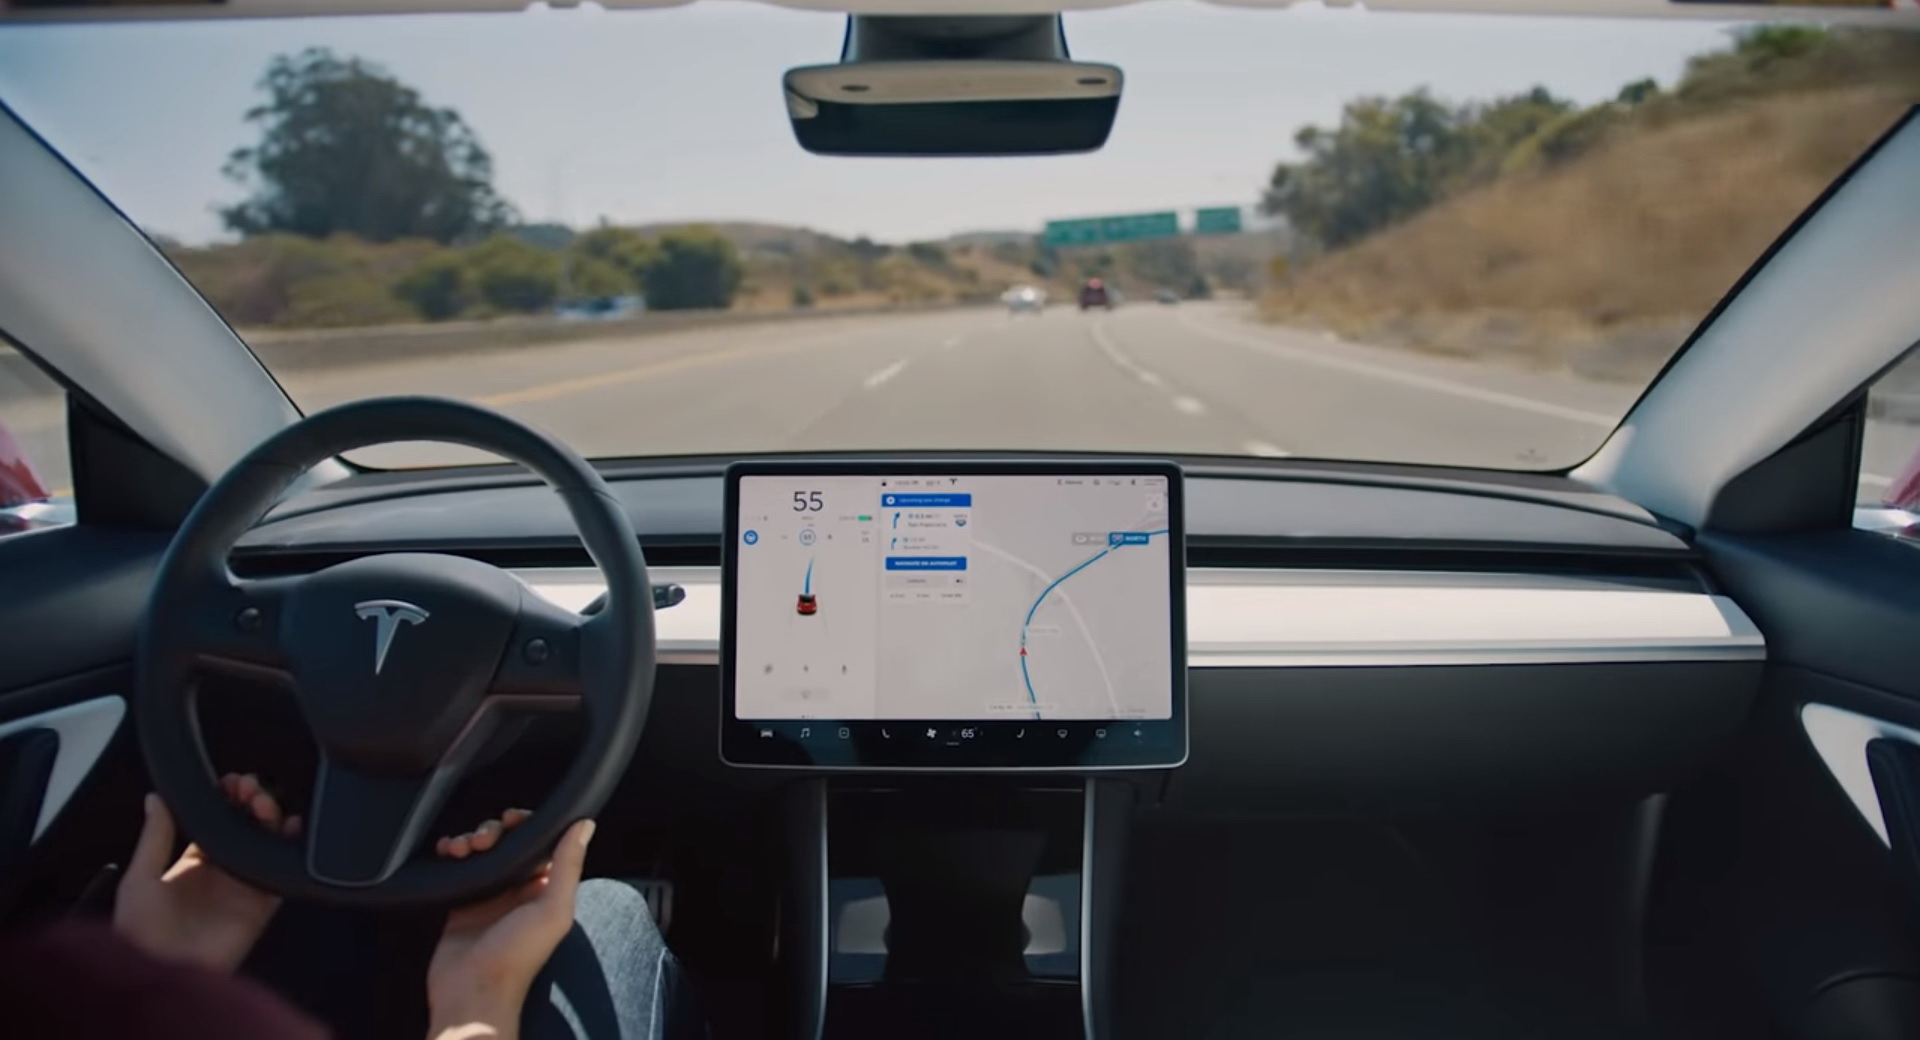 Tesla Raises Price Of “Full Self-Driving” Option Again, This Time By $1,000 To $8,000